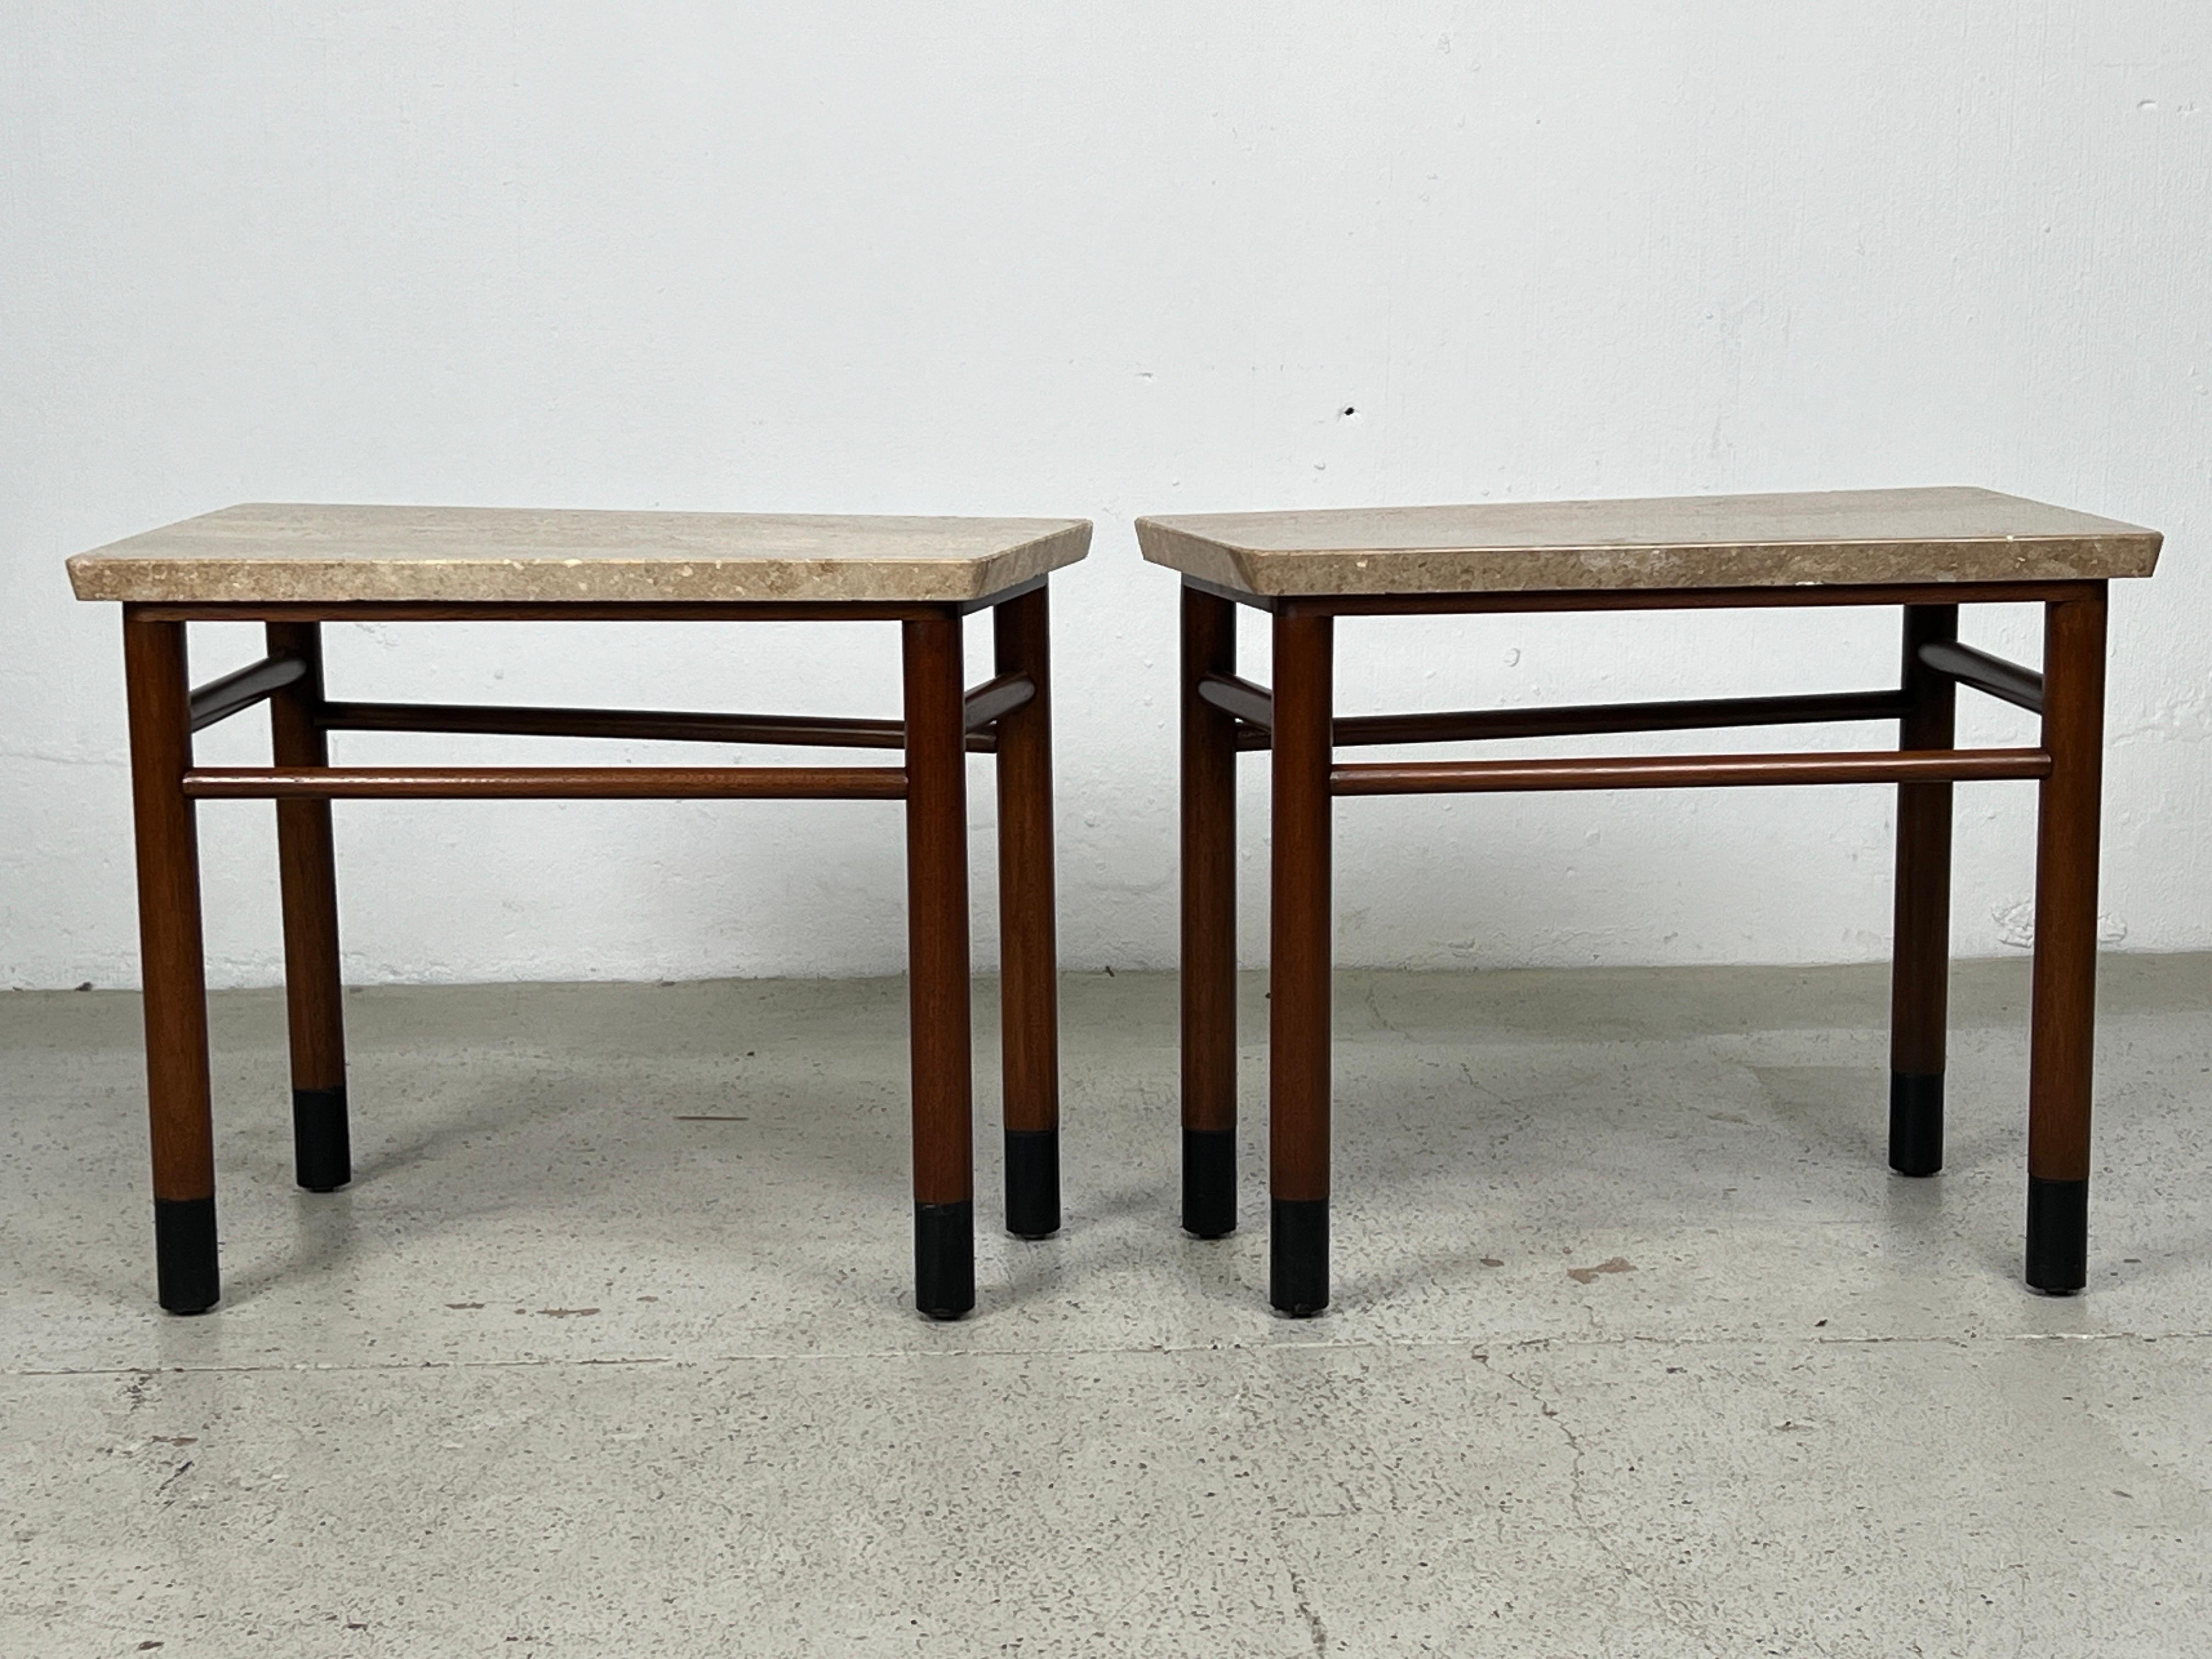 Pair of Wedge Shaped Travertine Tables by Edward Wormley for Dunbar For Sale 6